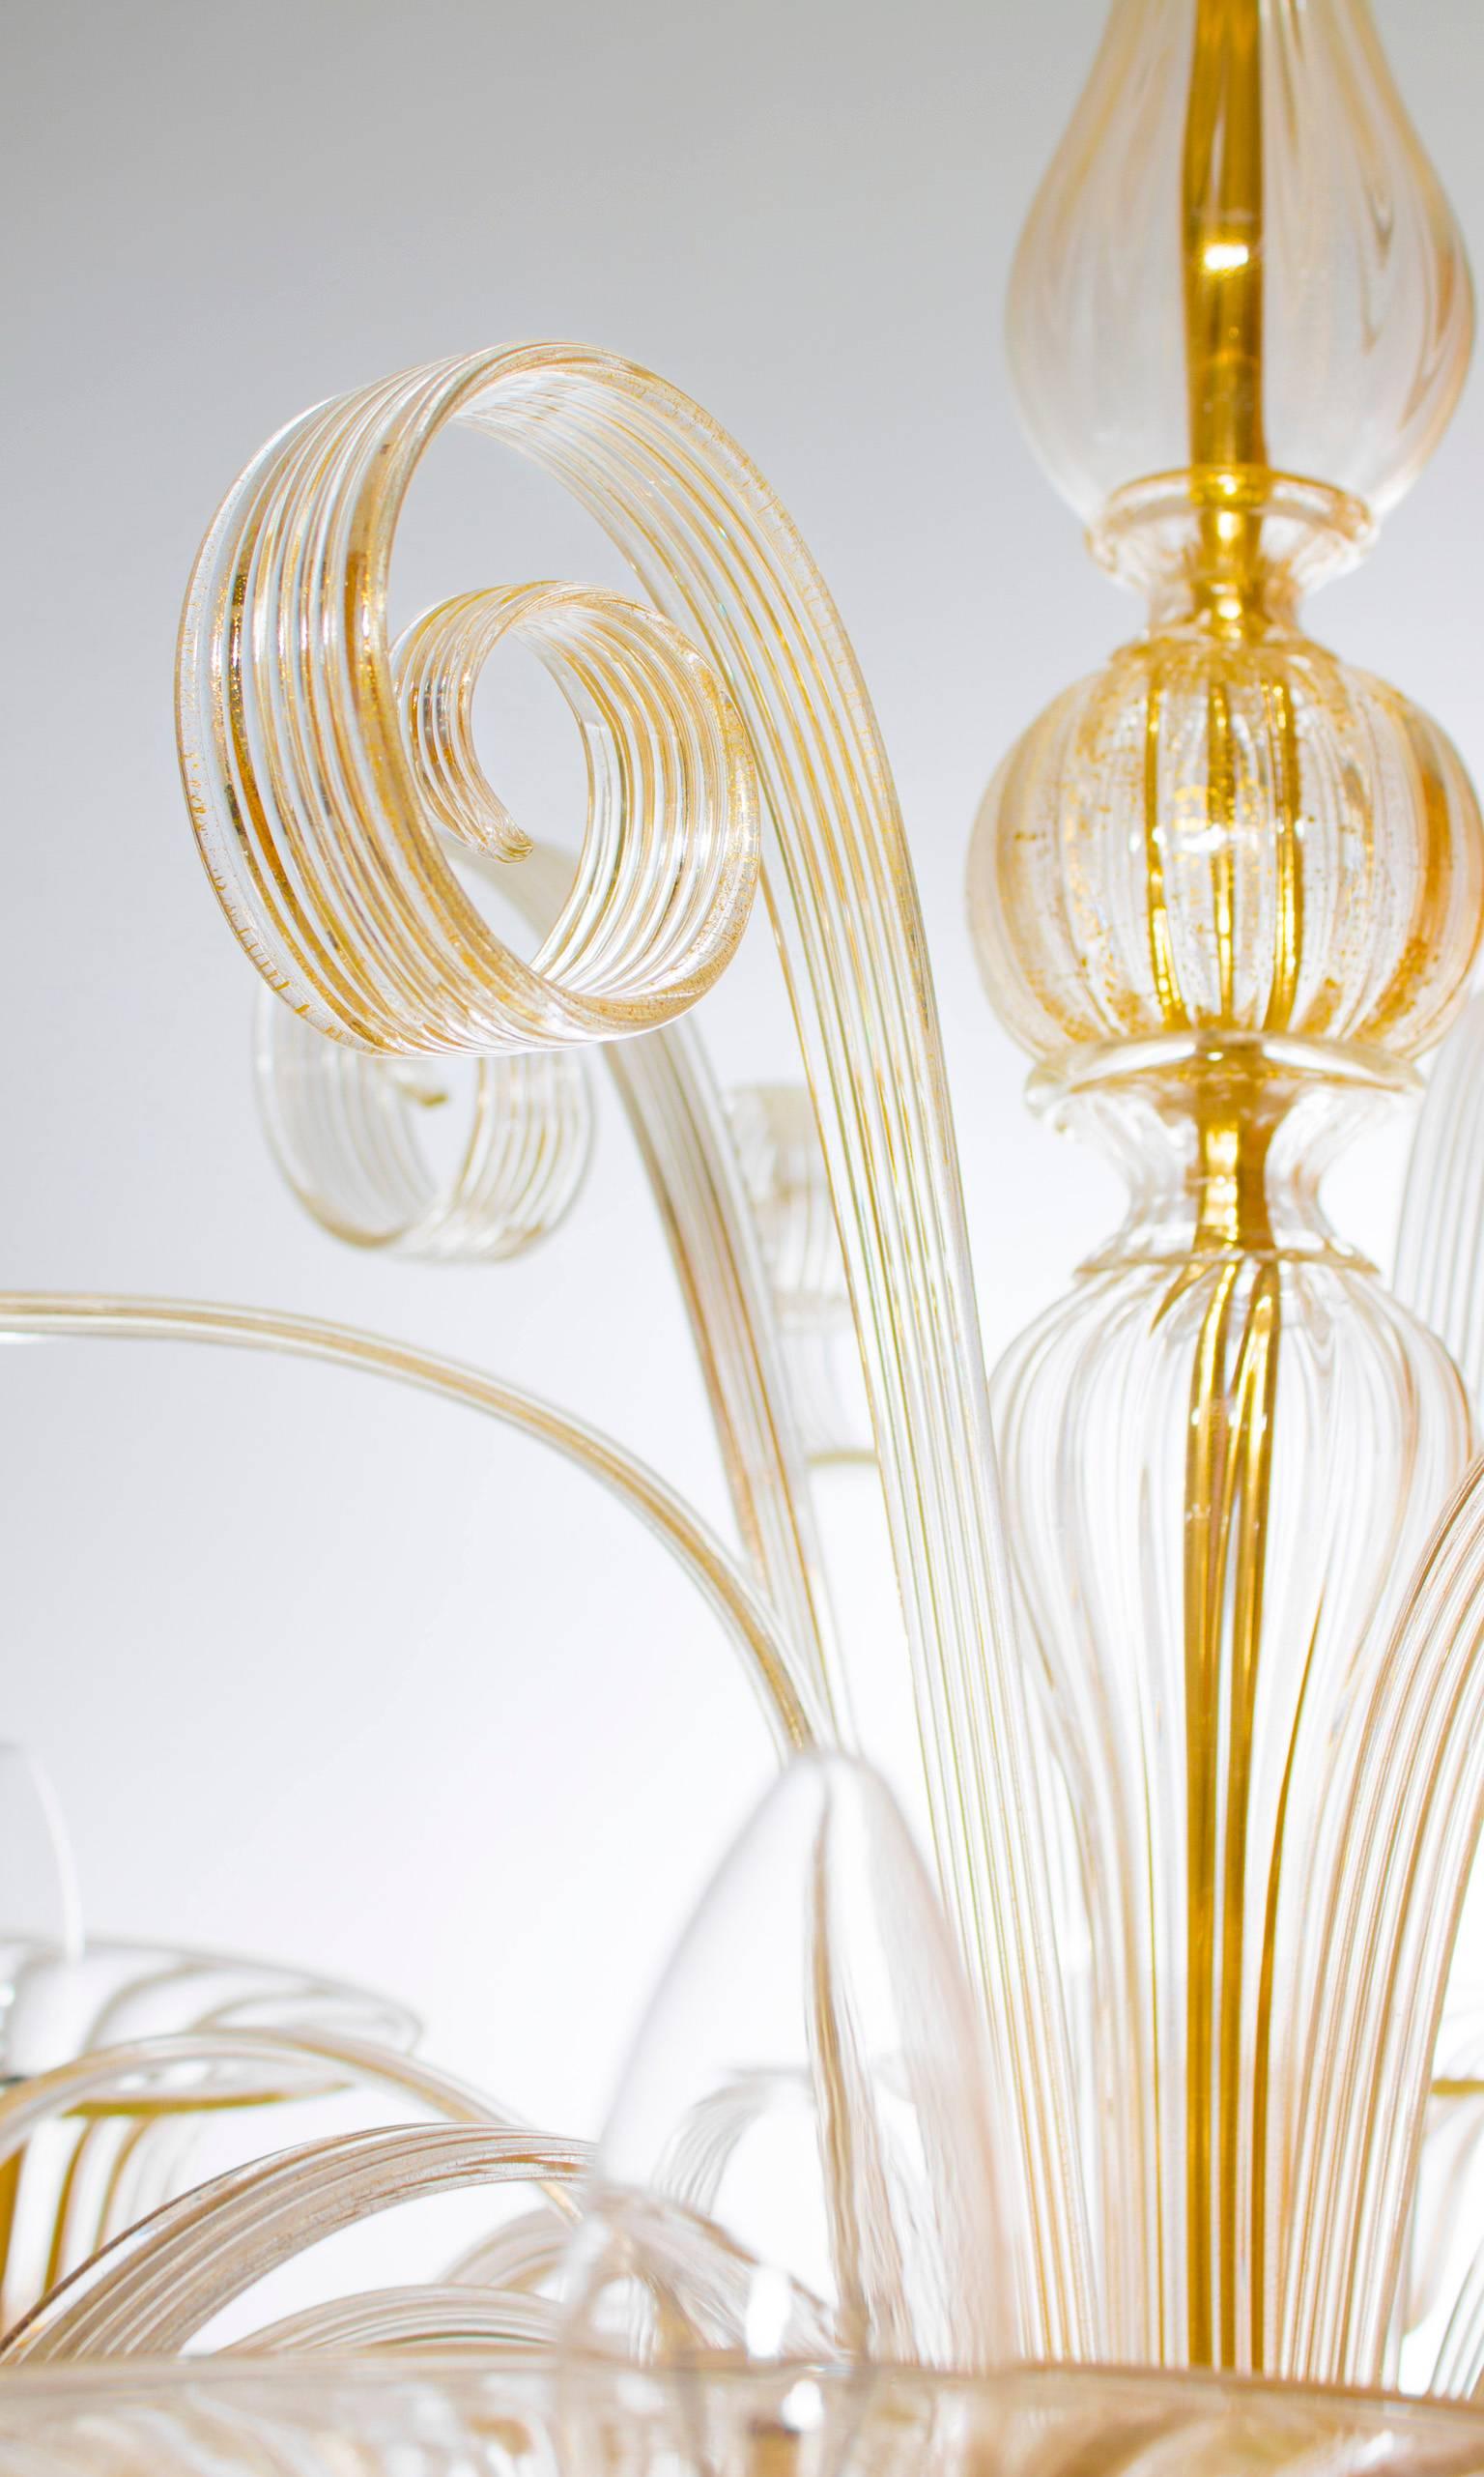 Italian Crafted Blown Murano Glass Chandelier adorned with Gold Pastorals 1990s Italy  For Sale